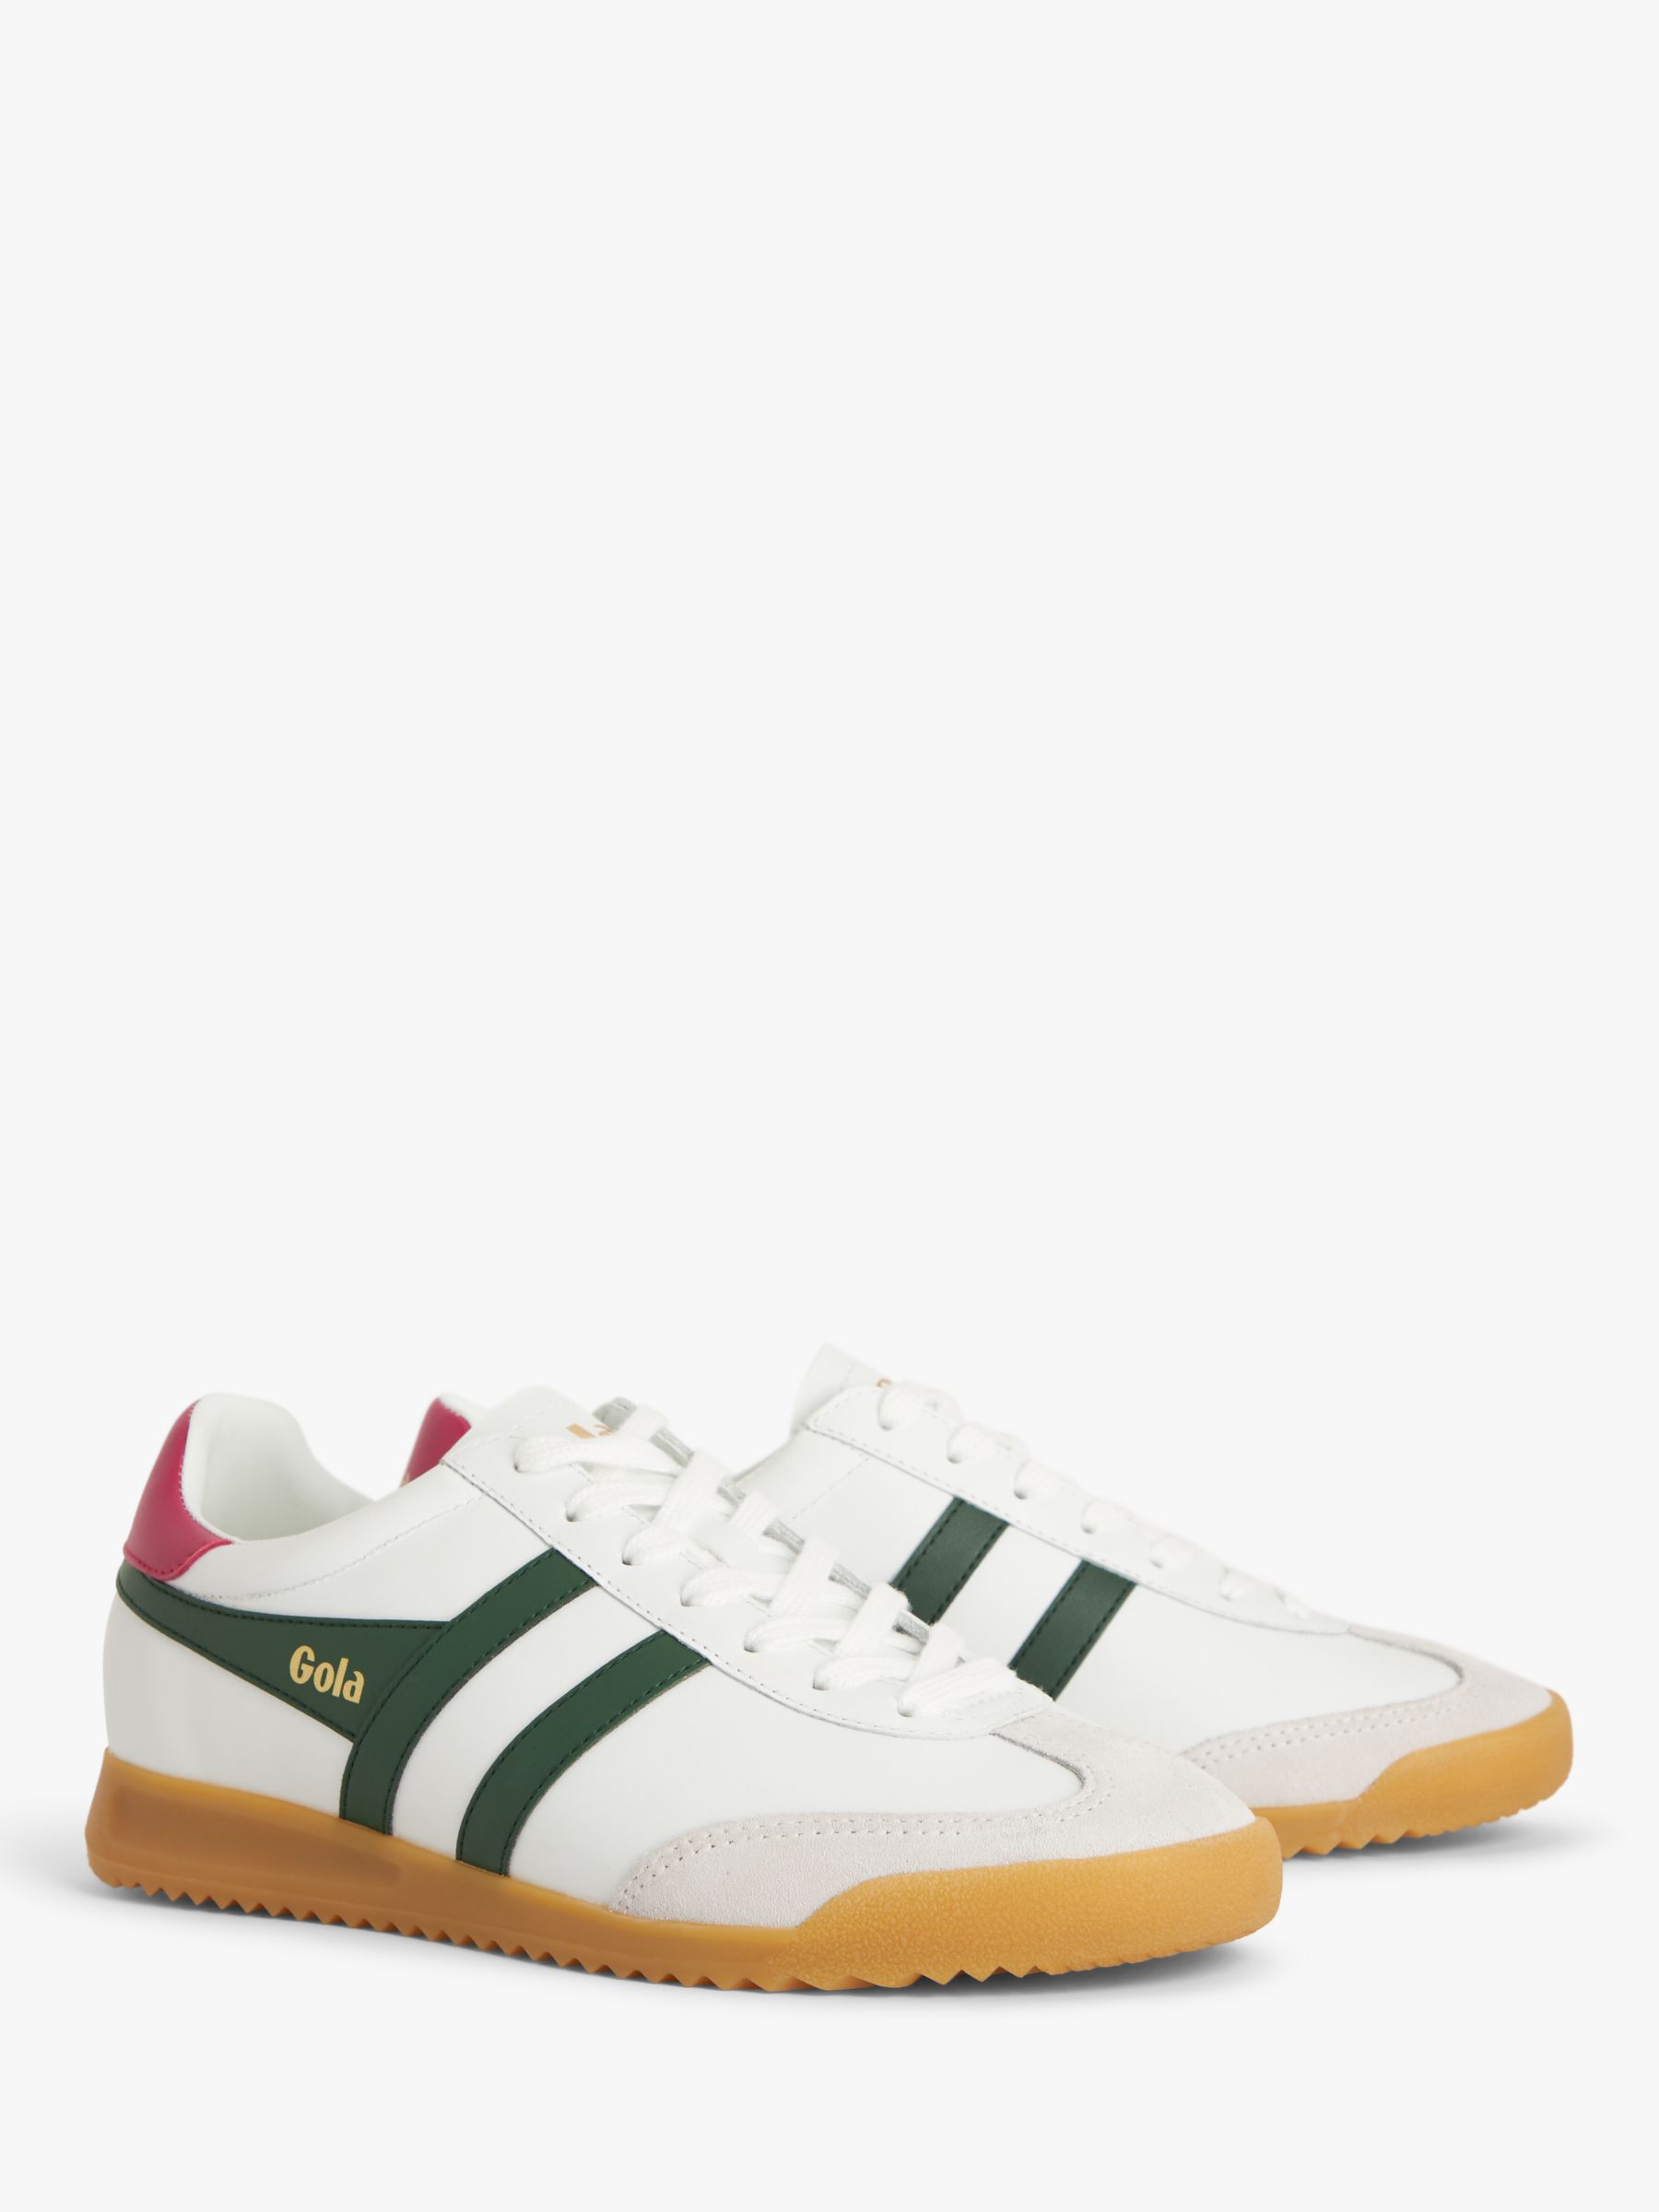 Buy Gola Torpedo Leather Trainers, Green/Fuchsia Online at johnlewis.com